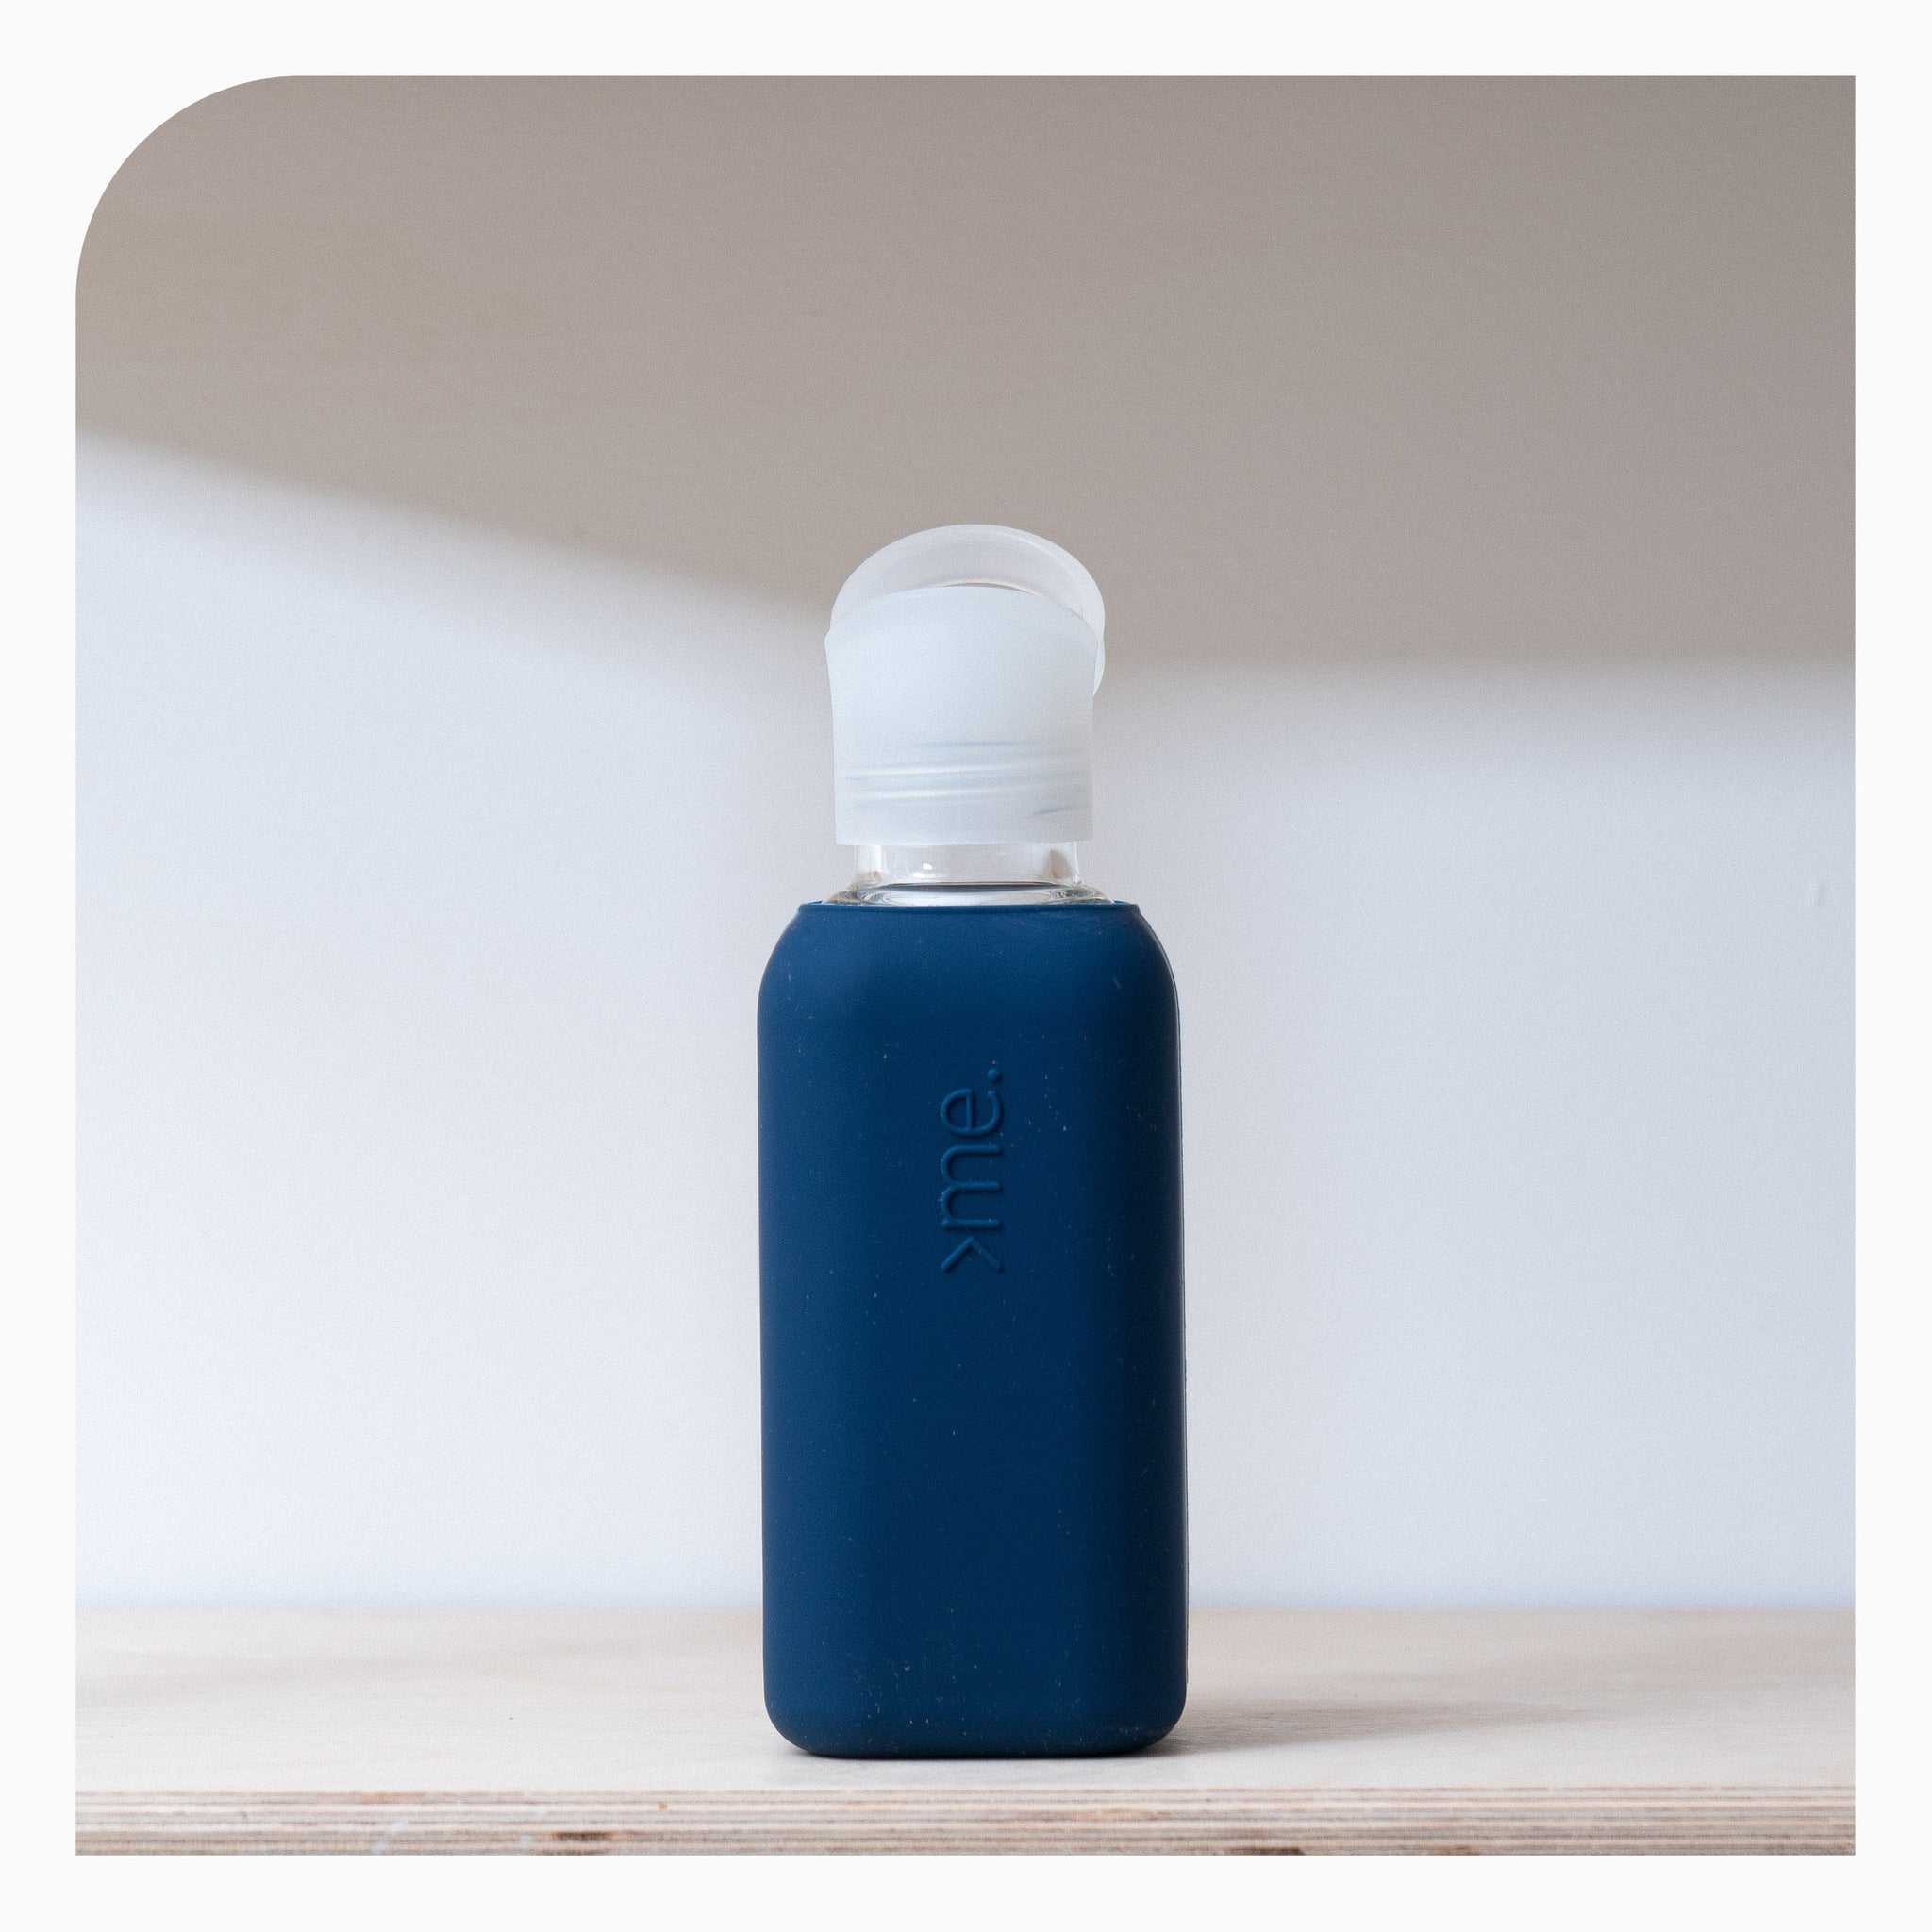 Squire Me Glass and Silicone Drinks Bottle - Navy